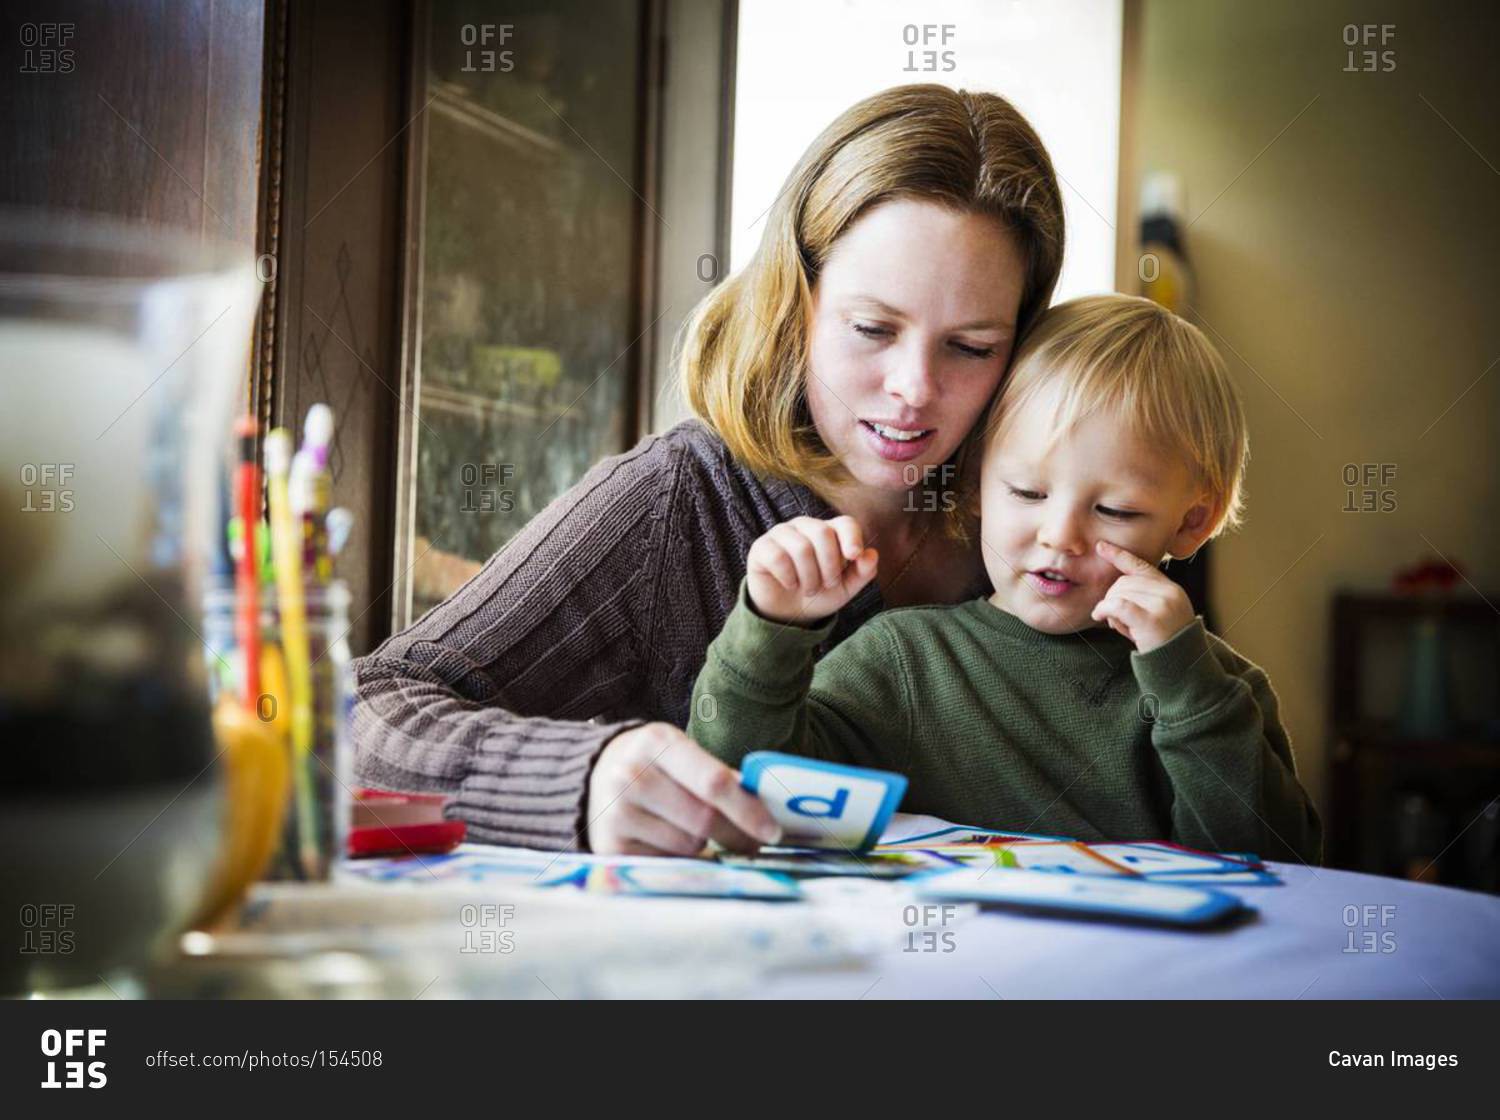 Woman showing alphabet flash cards to her son